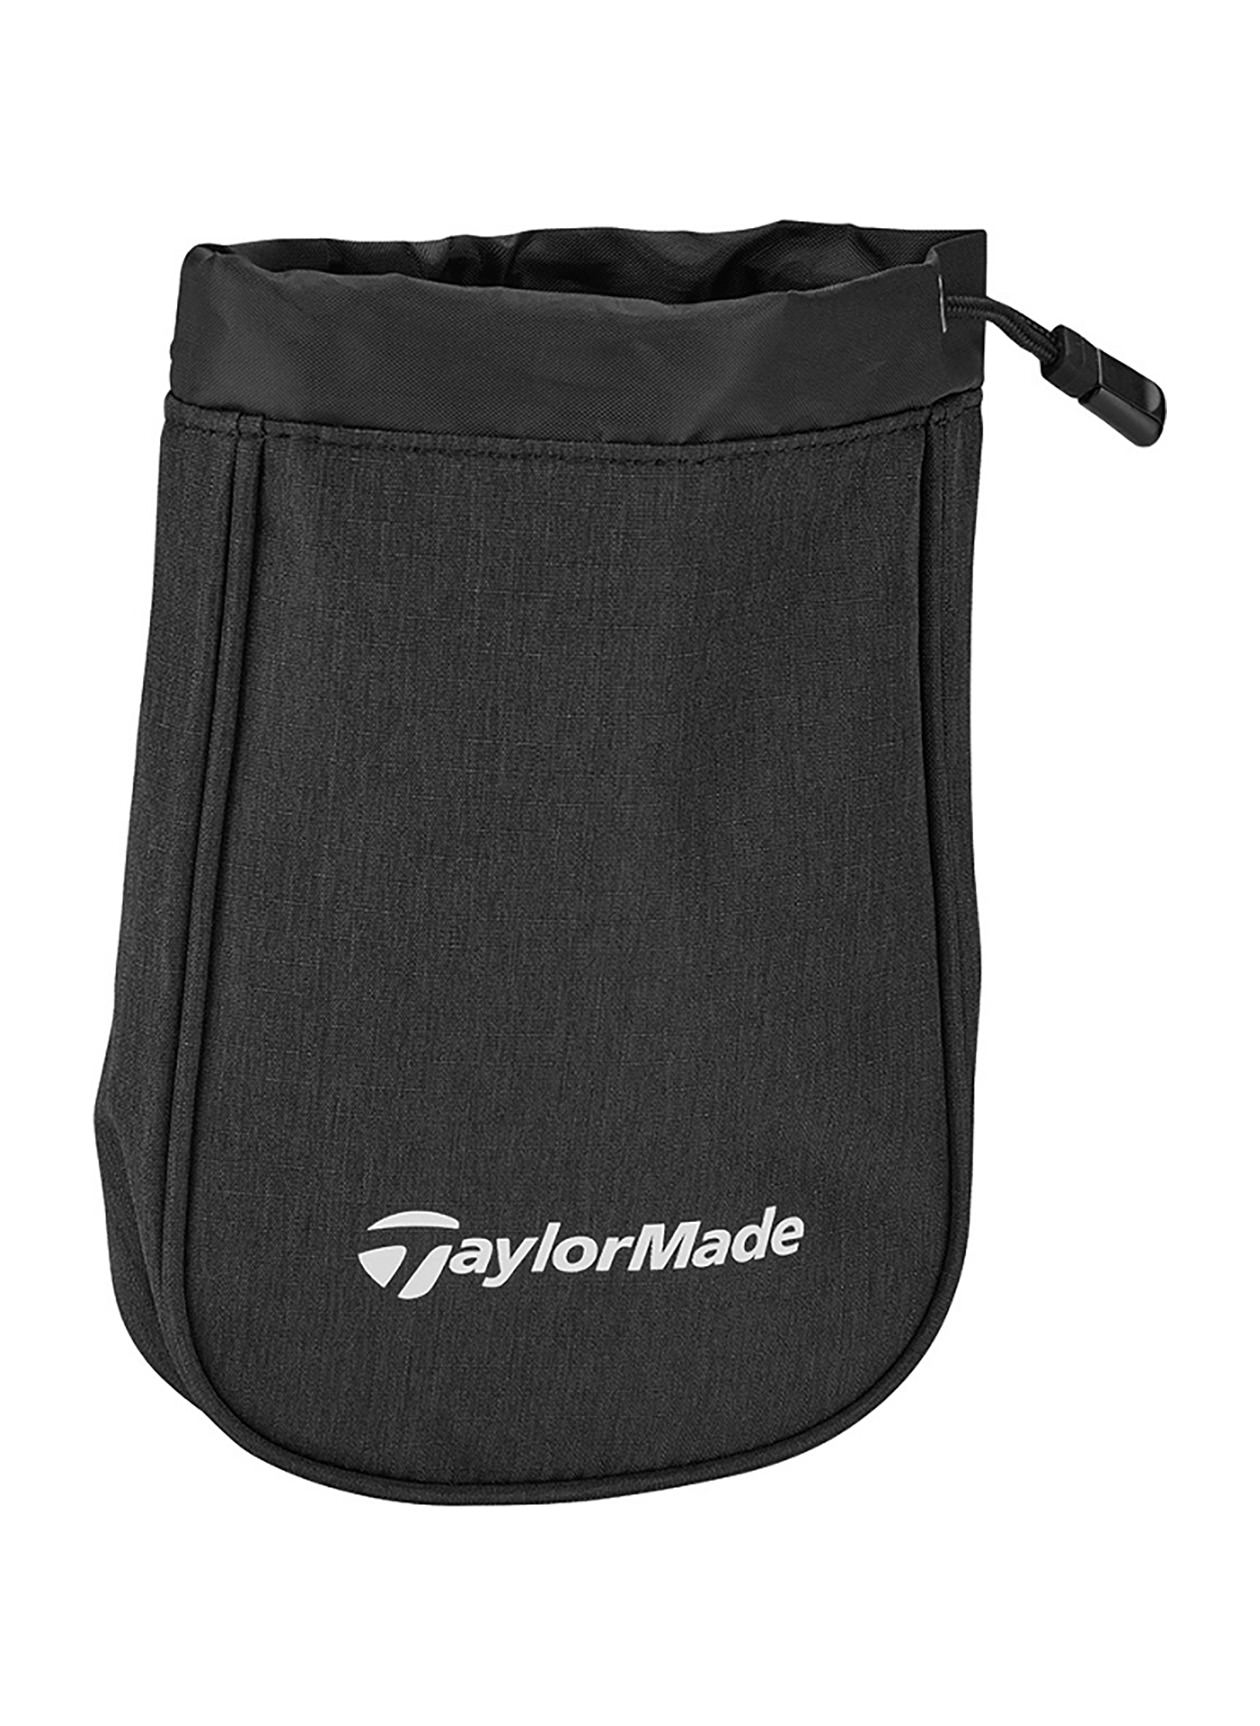 TaylorMade Black Performance Valuable Pouch